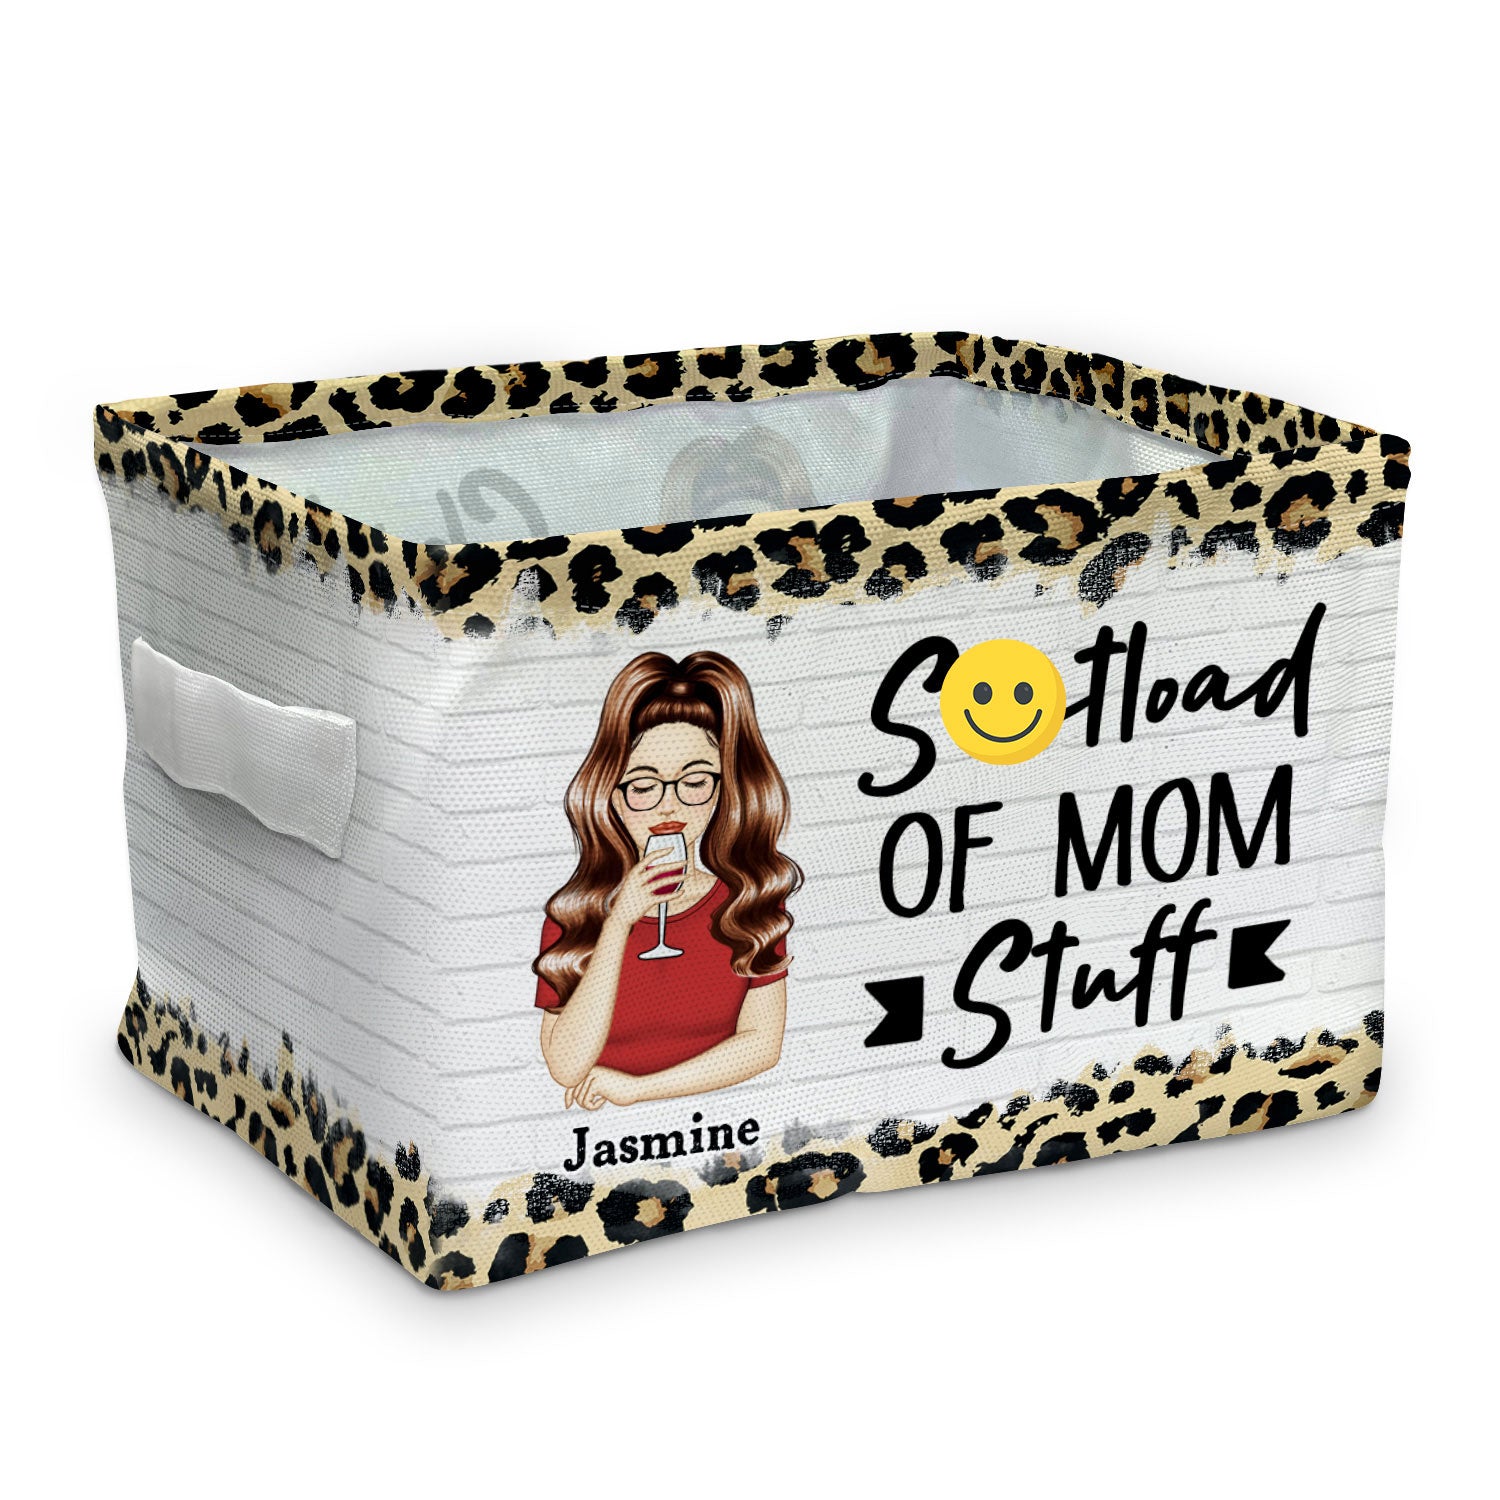 Mom Stuff - Gift For Mother - Personalized Storage Box